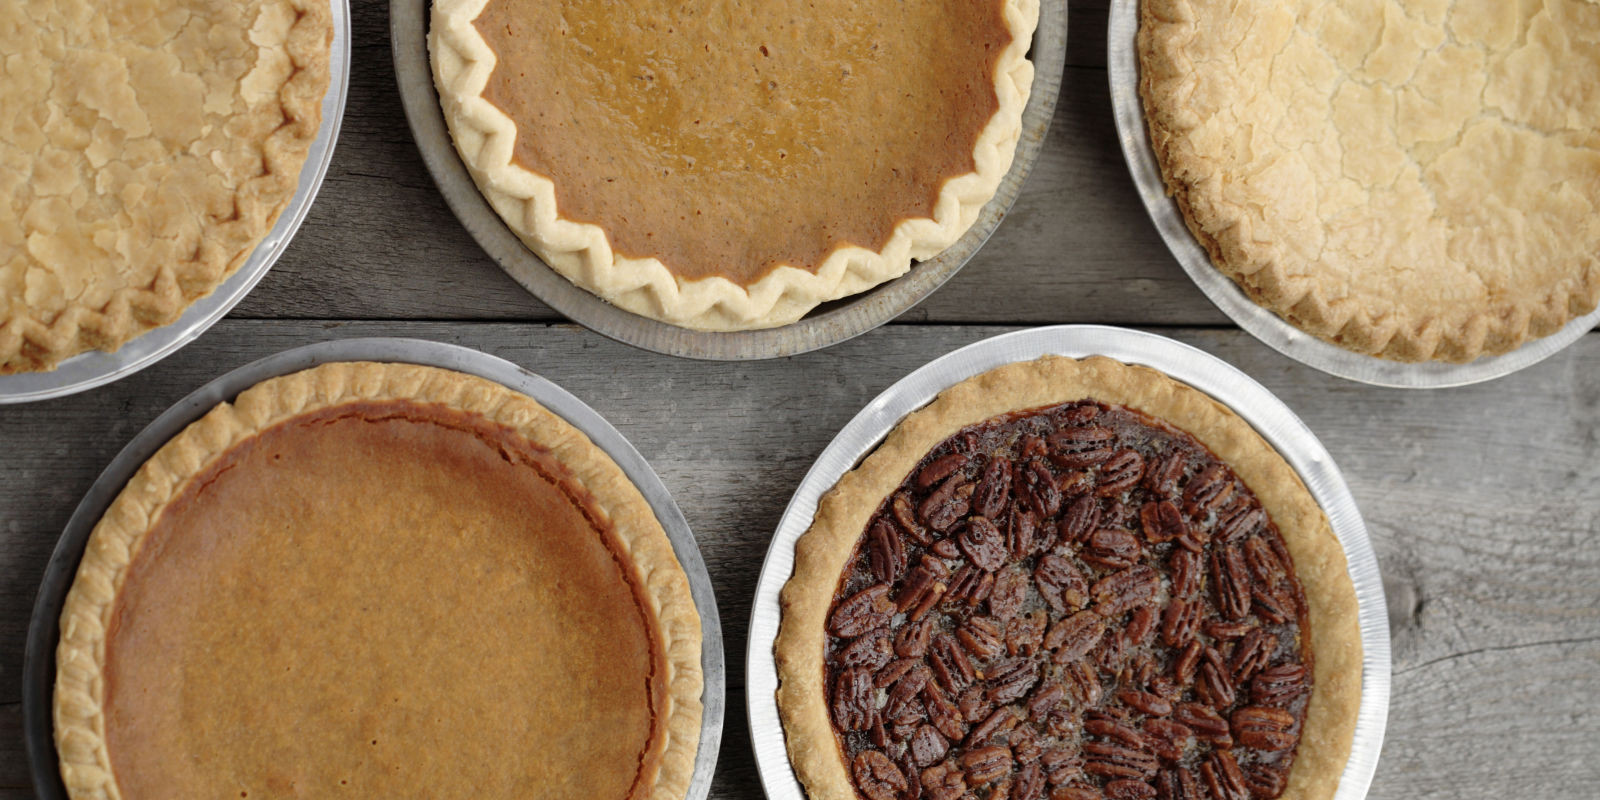 Most Popular Thanksgiving Pies
 This Is the Most Popular Holiday Pie on Pinterest Top